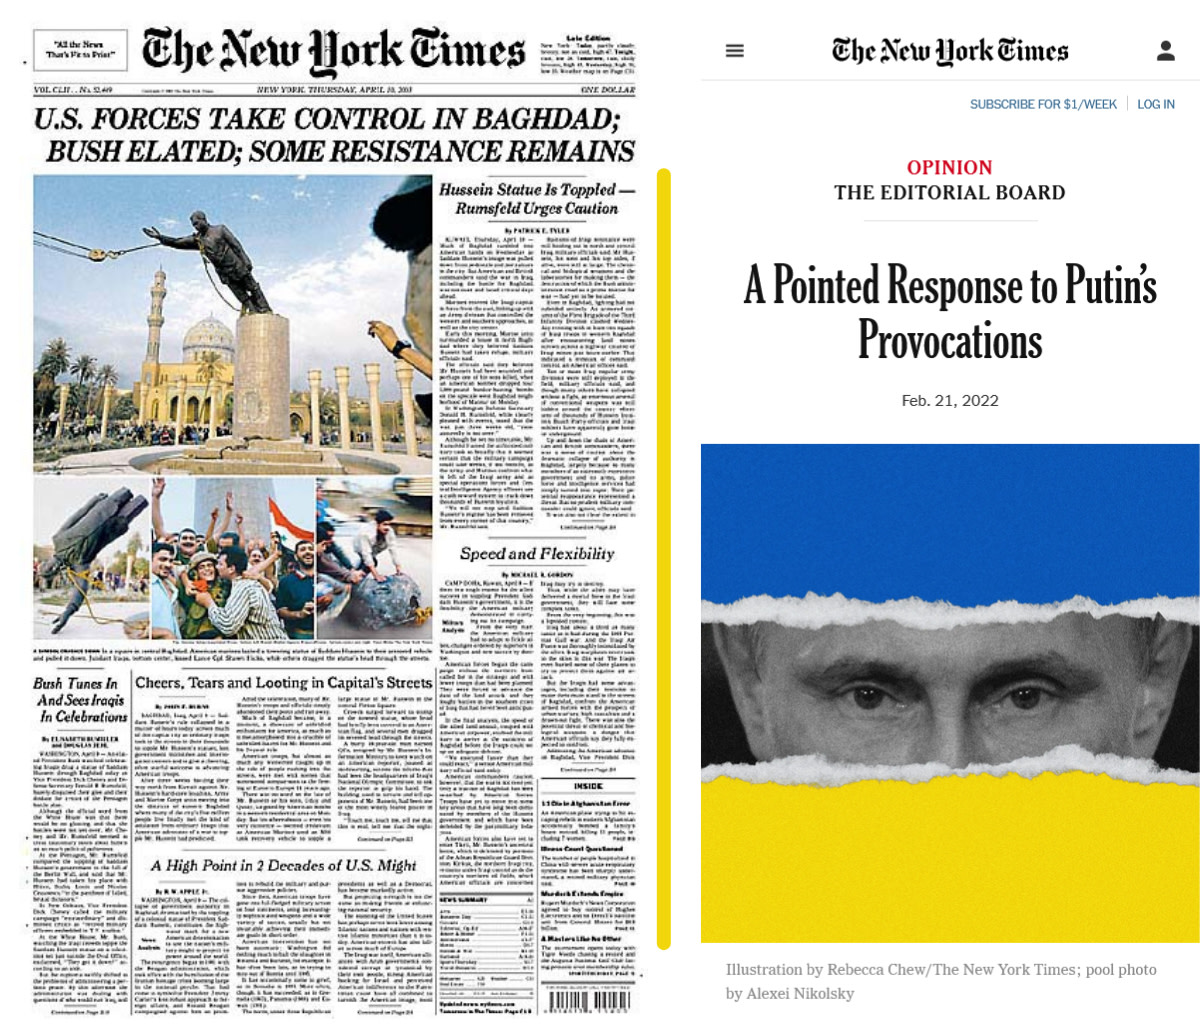 New York Times war coverage